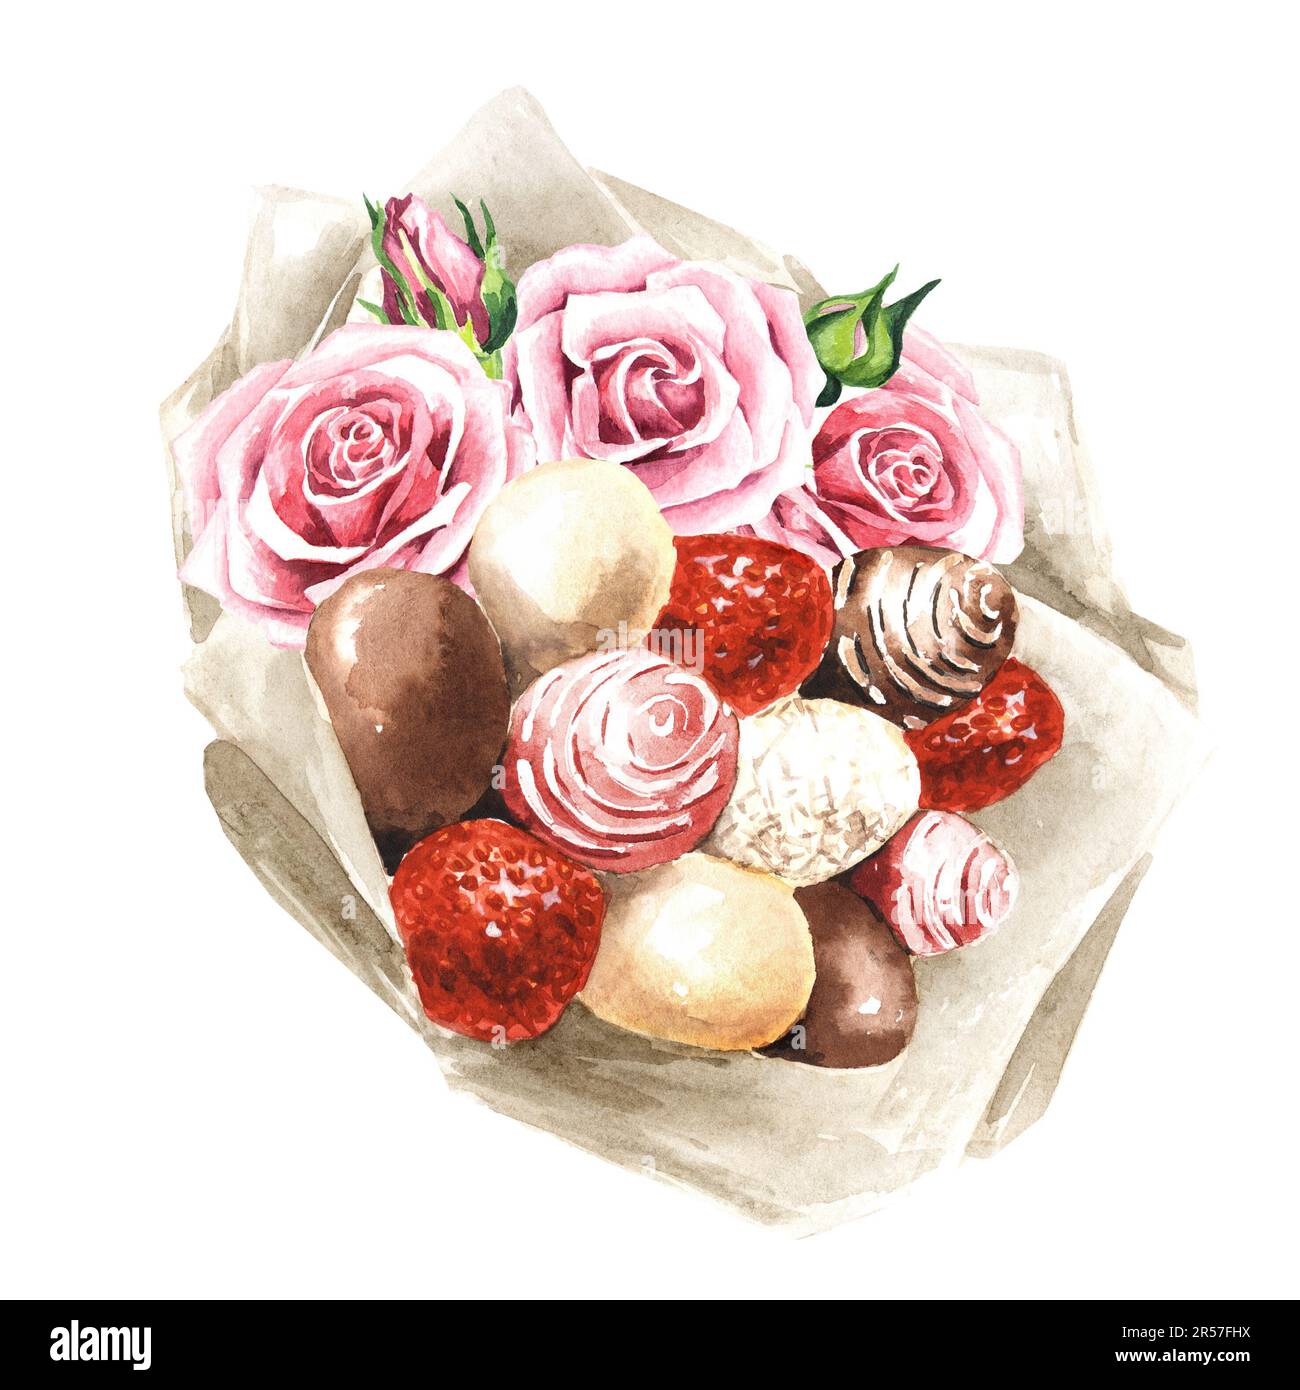 Sweet edible bouquet, giant strawberries in glaze dipped in white and milk chocolate, and pink rose flowers. Hand drawn watercolor illustration isolat Stock Photo